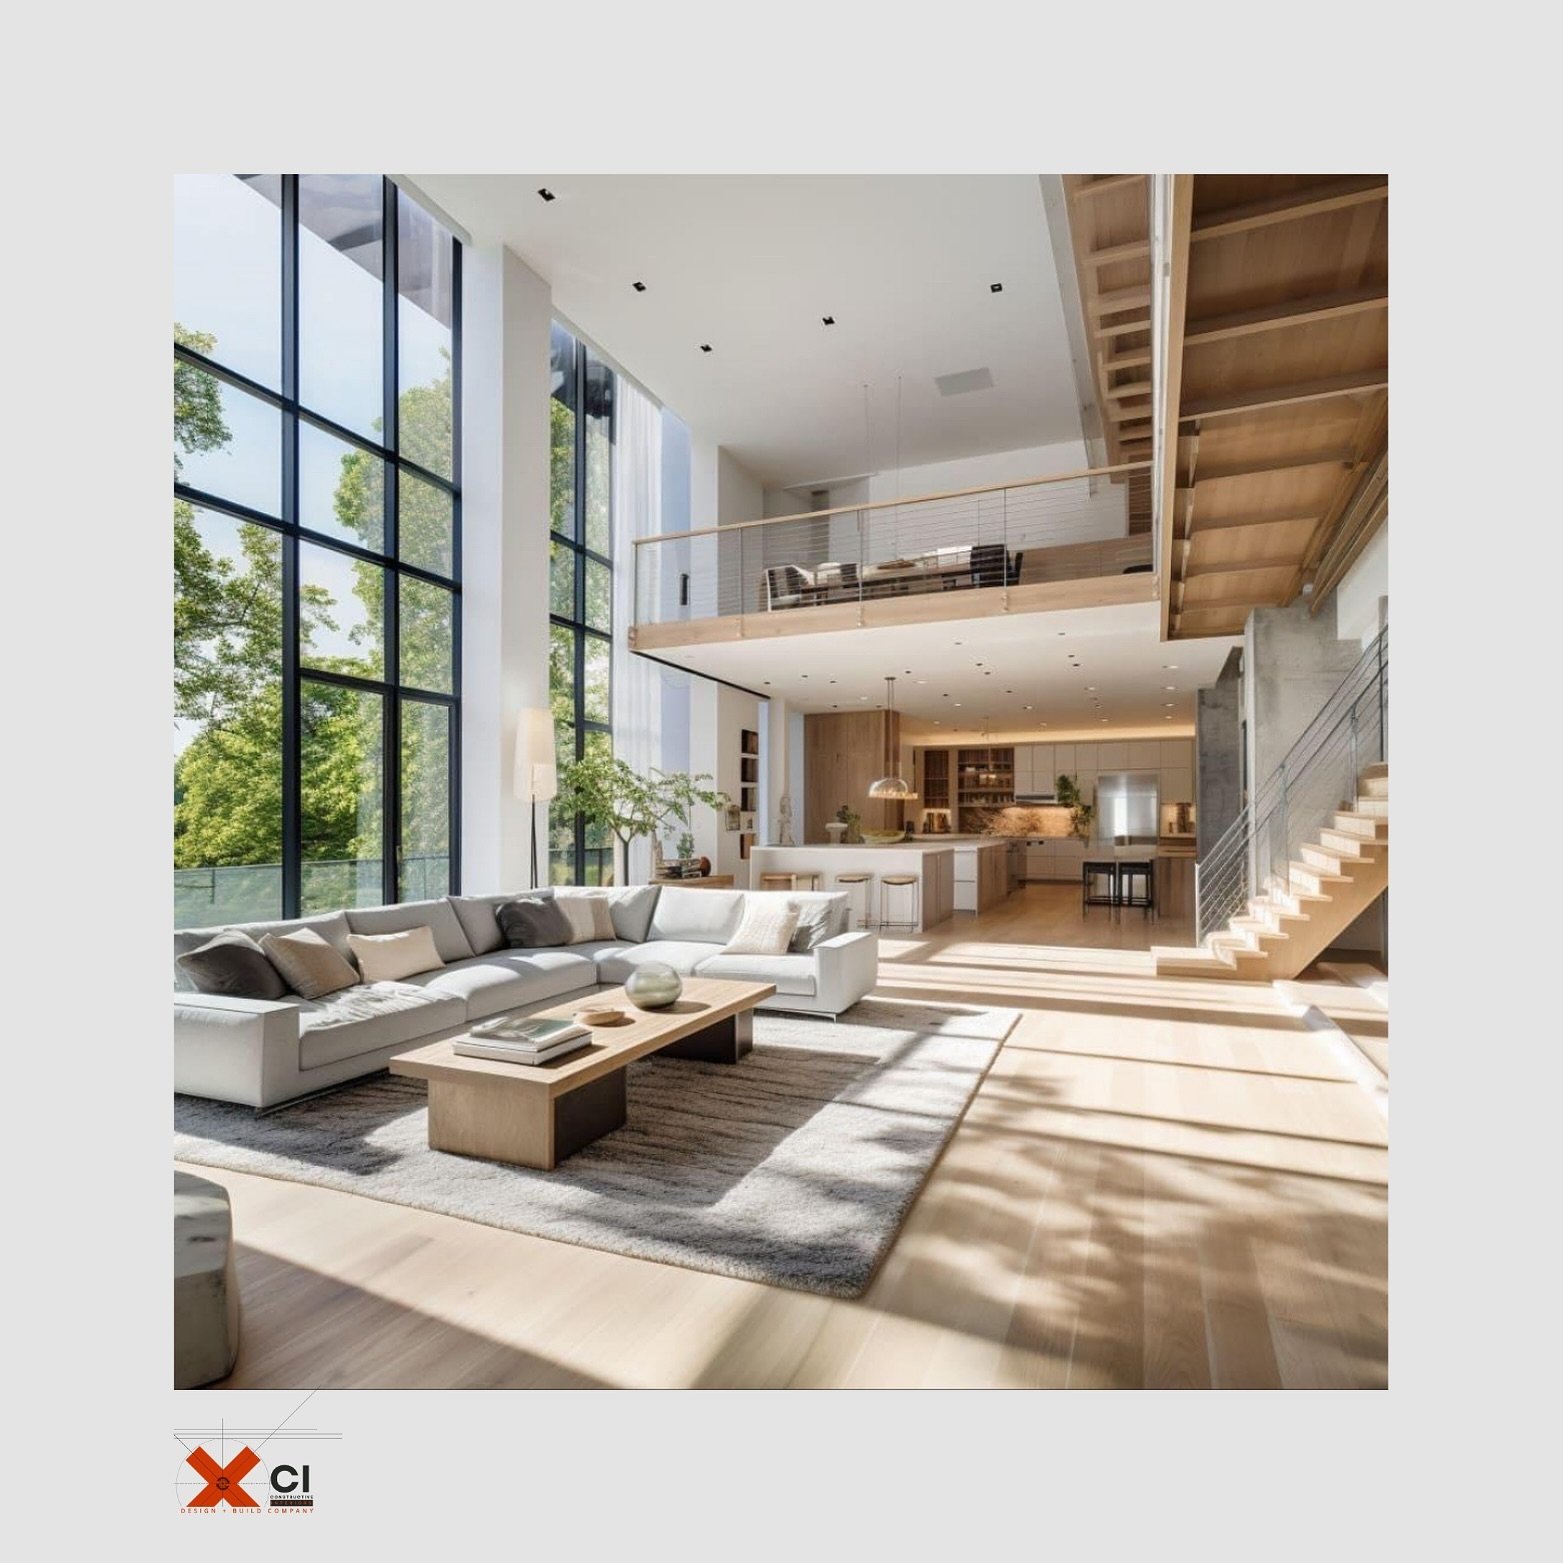 Light and bright combined with neural wood earthy texture 🪄 .
 Design + Build
From outdated to outstanding! 🏚️➡️🏡 We&rsquo;ll take you through a showcase of before-and-after projects, revealing the artistry of design and the impact of strategic re